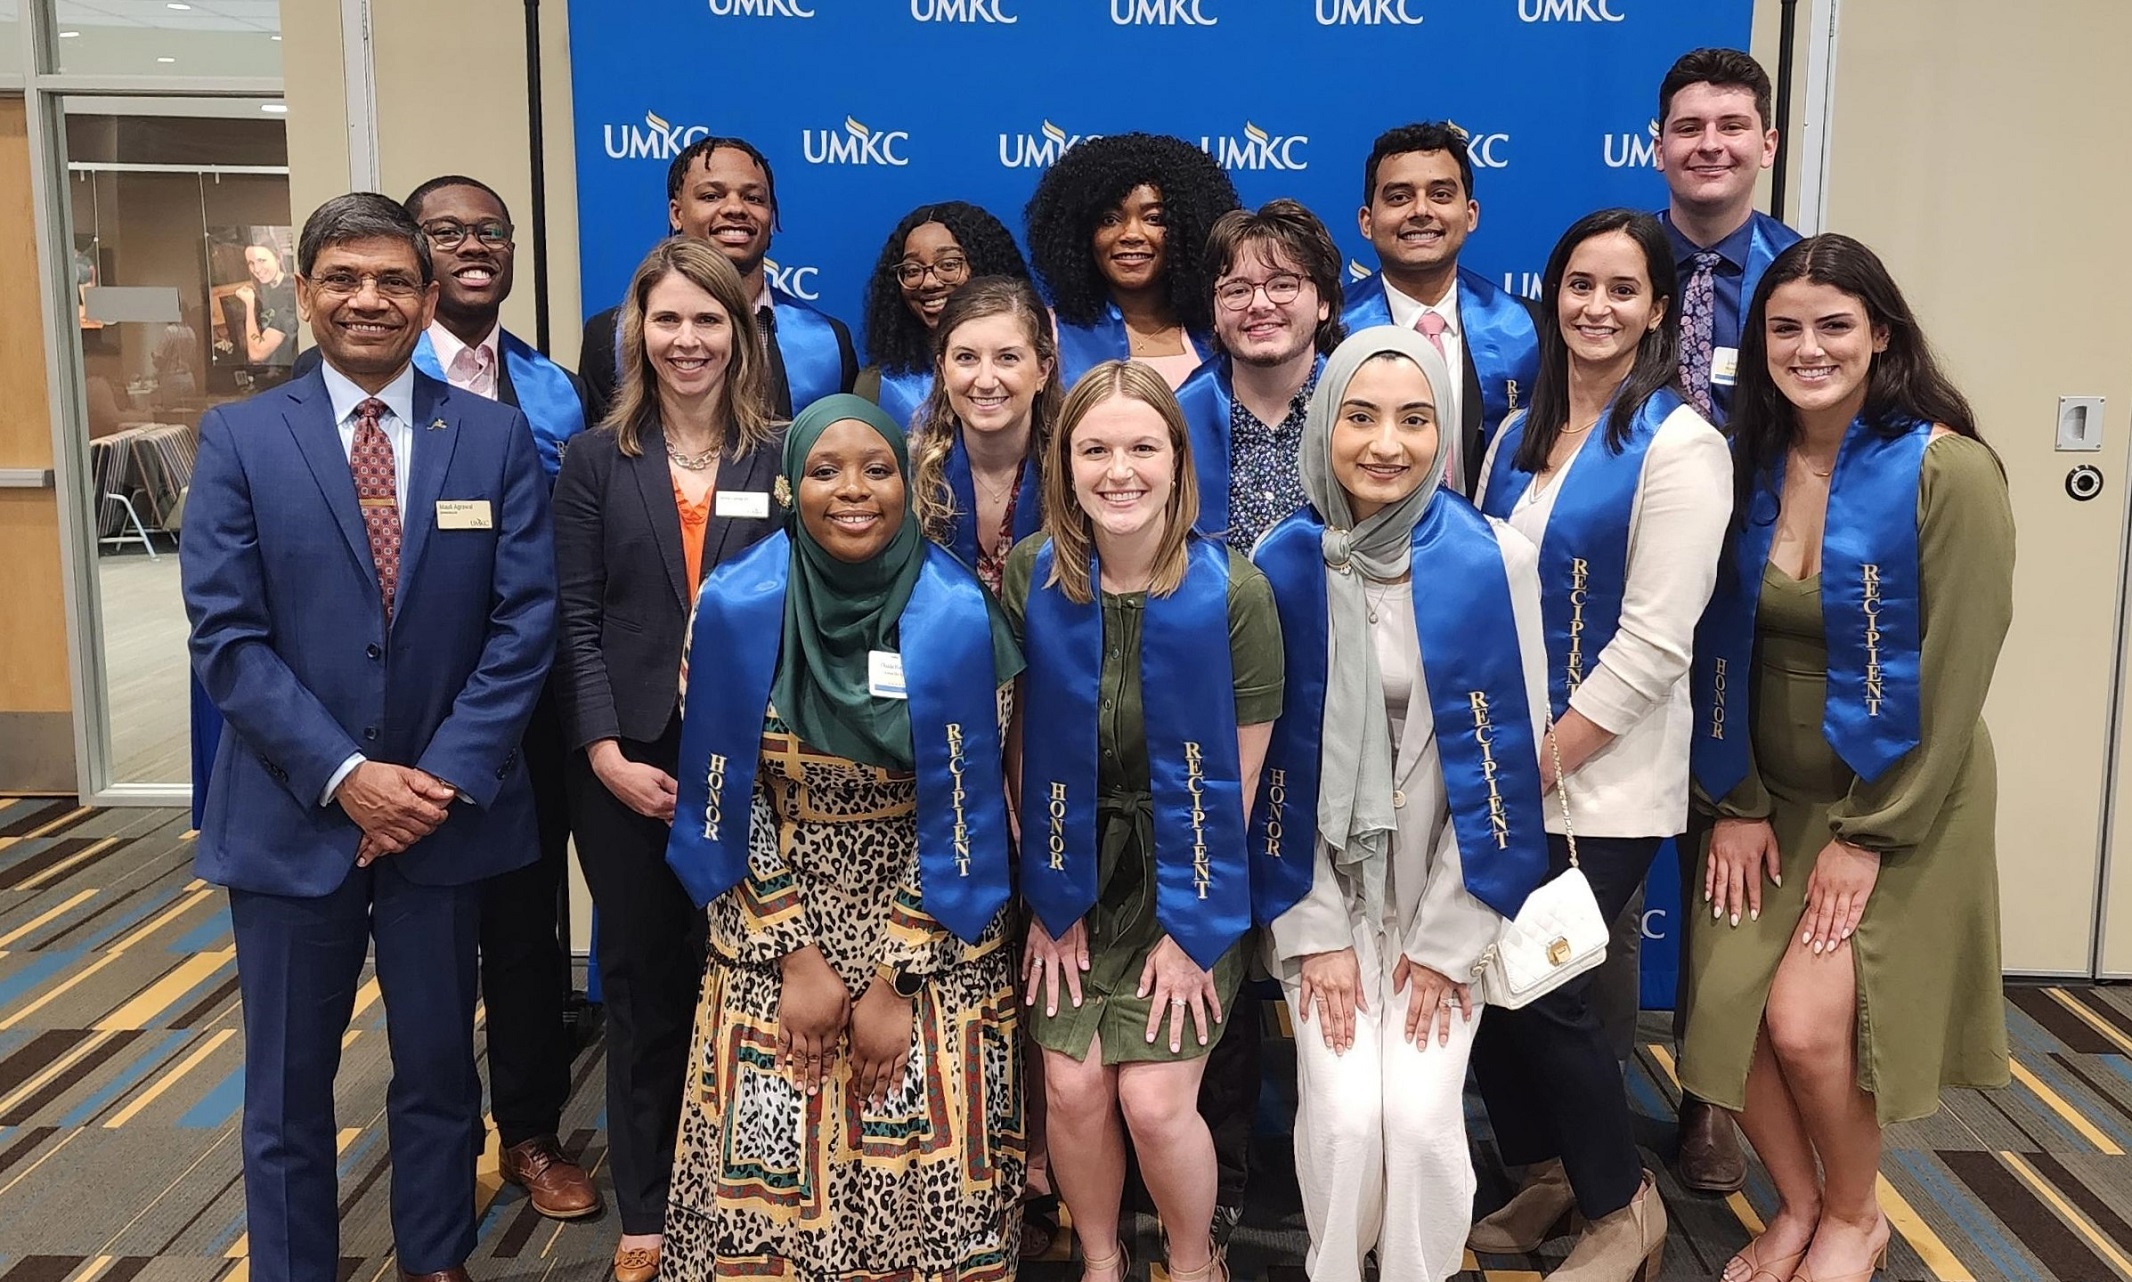 Thirteen students stand with Chancellor Agrawal and Provost Lundgren in front of a UMKC backdrop and smile